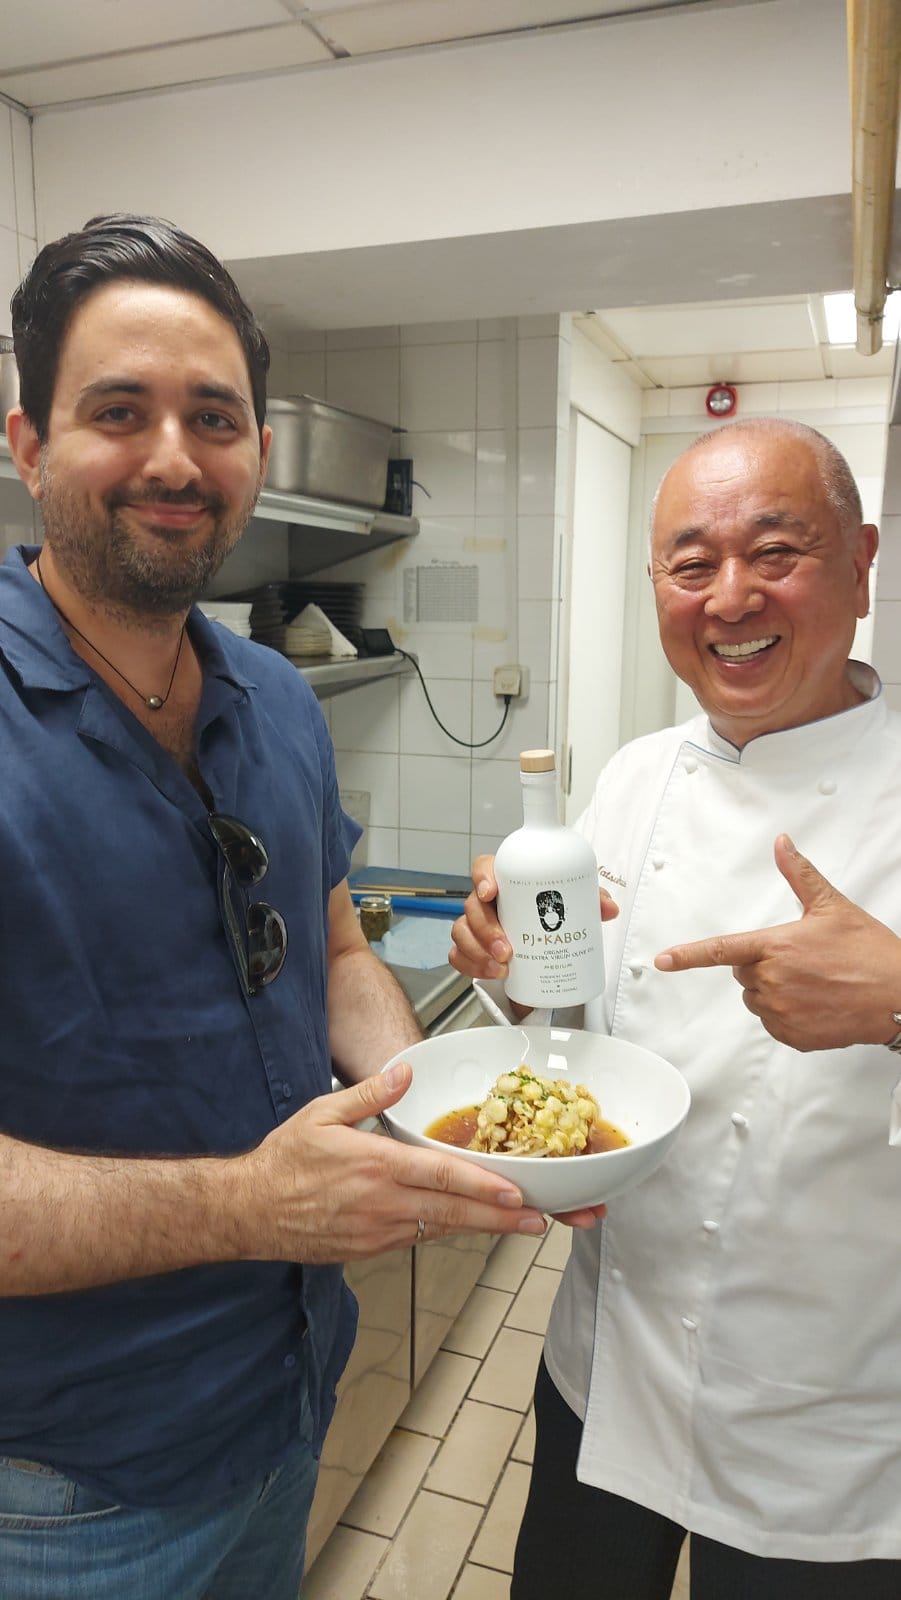 World-renowned chef, Nobu Matsuhisa, stands in Matsuhisa Athens’s kitchen and points to his olive oil of choice, PJ KABOS. The founder and owner of PJ Kabos, James Panagiotopoulos, is proudly standing beside him.